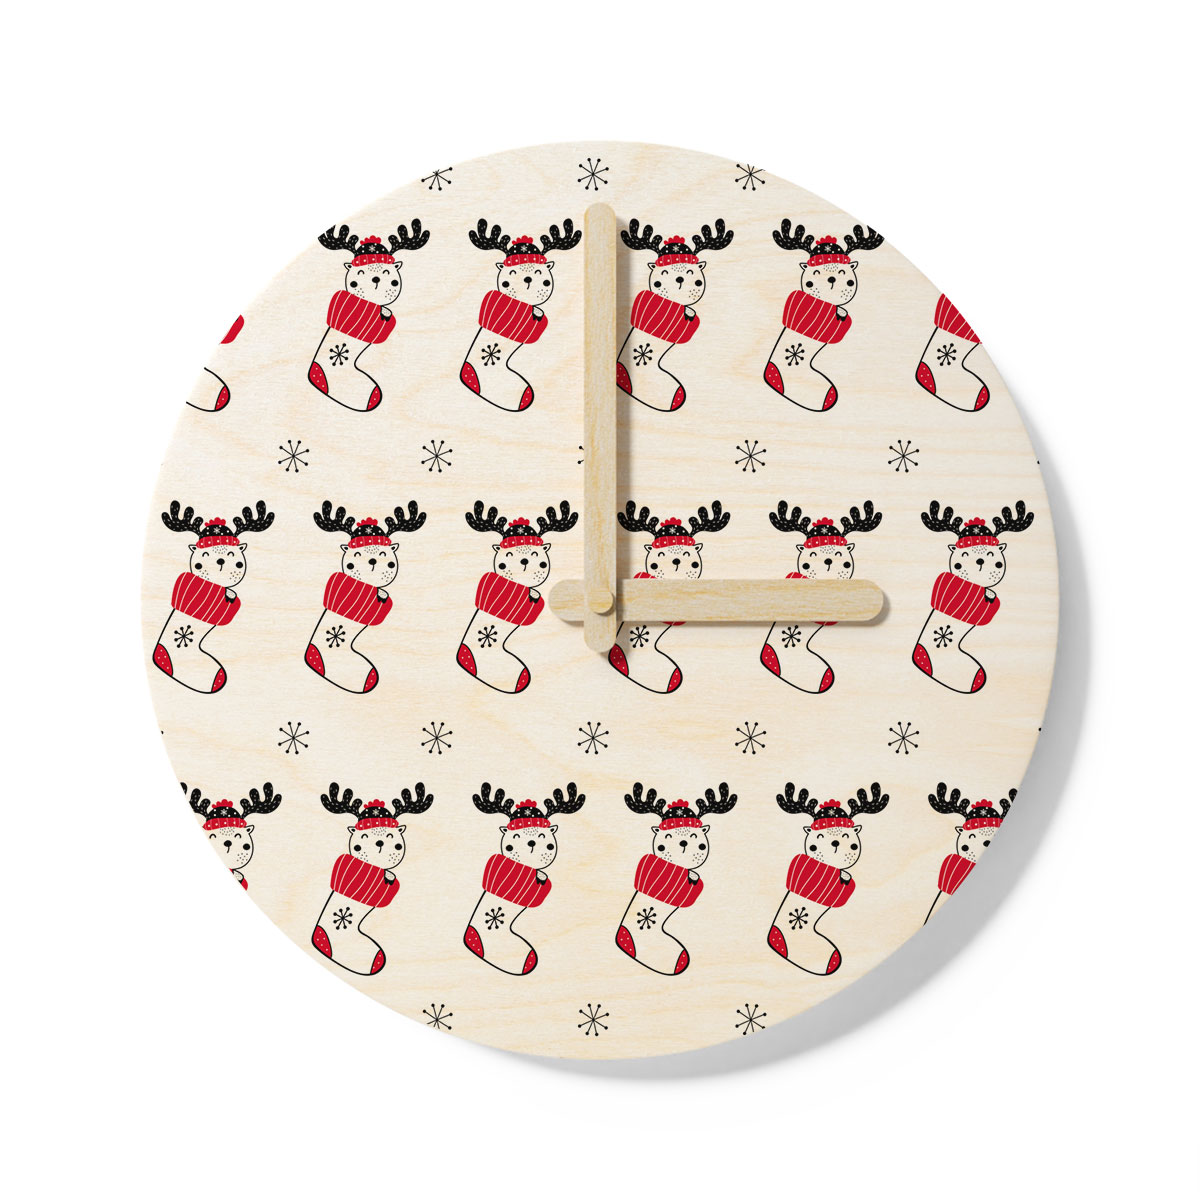 Reindeer Clipart In Hand Drawn Red Socks And Snowflake Clipart Seamless White Pattern Wooden Wall Clock